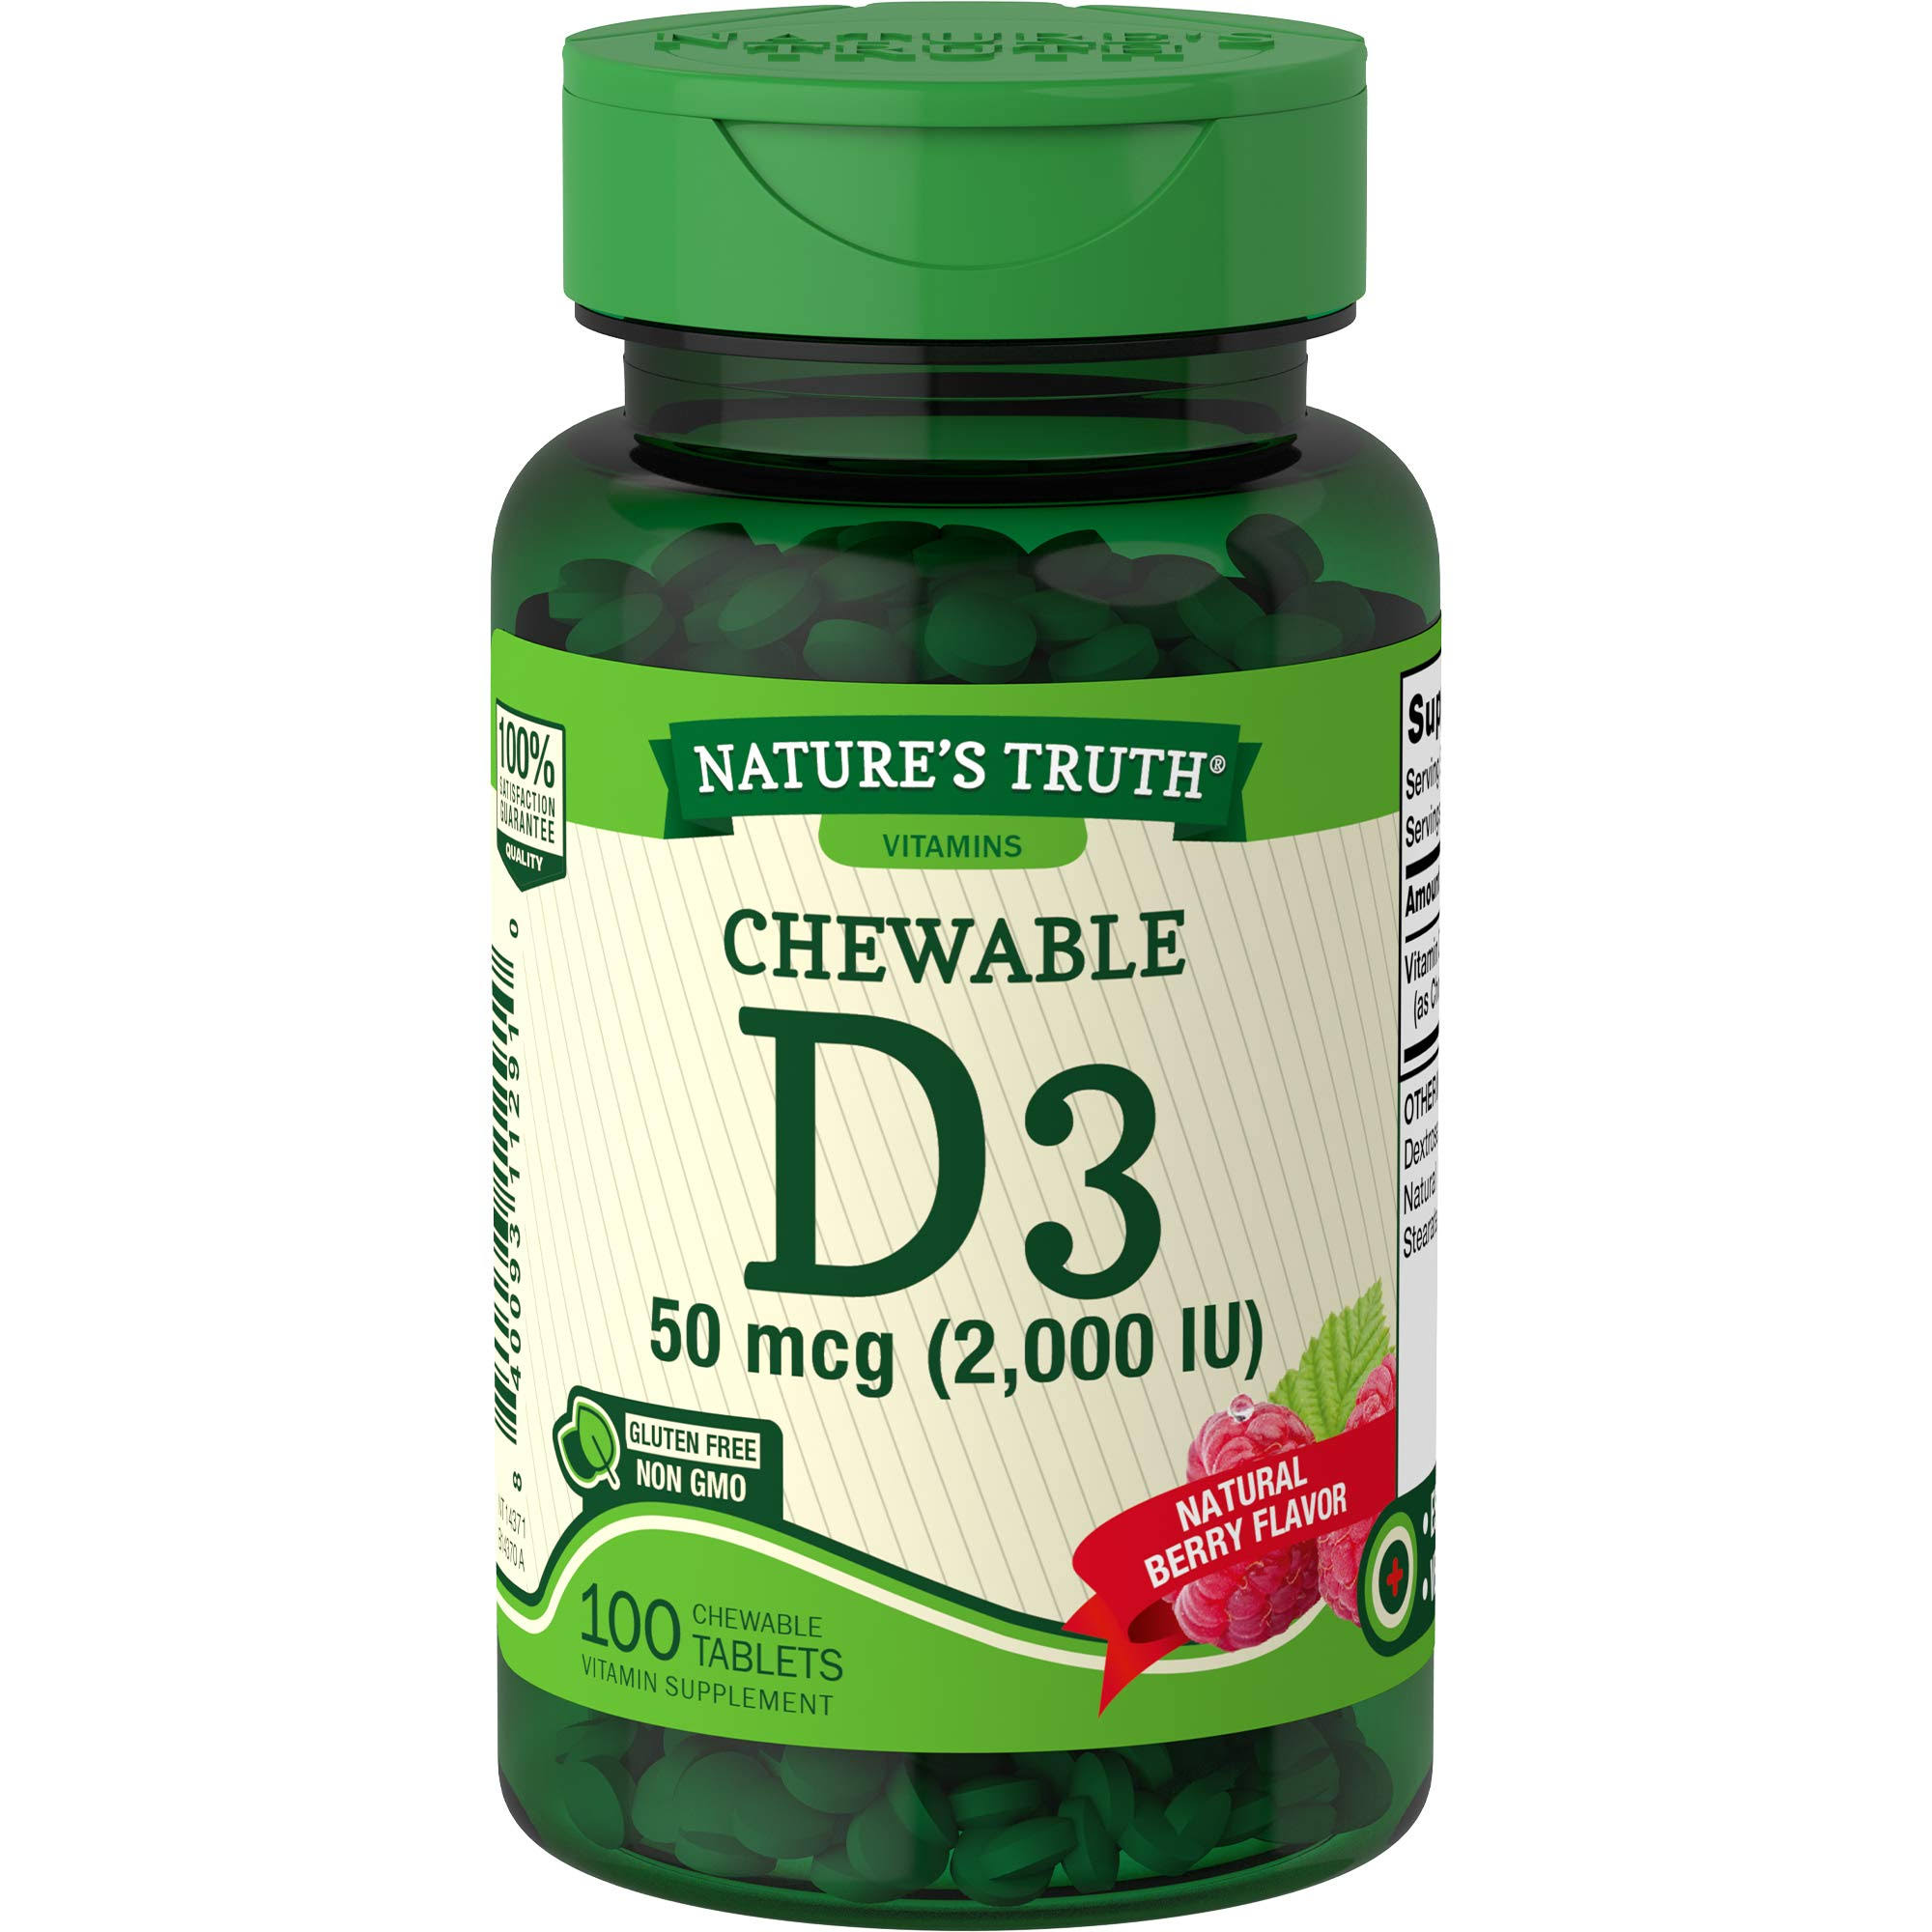 Natures Truth Vitamin D3, 50 mcg, Berry Flavor, Chewable Tablets - 100 tablets